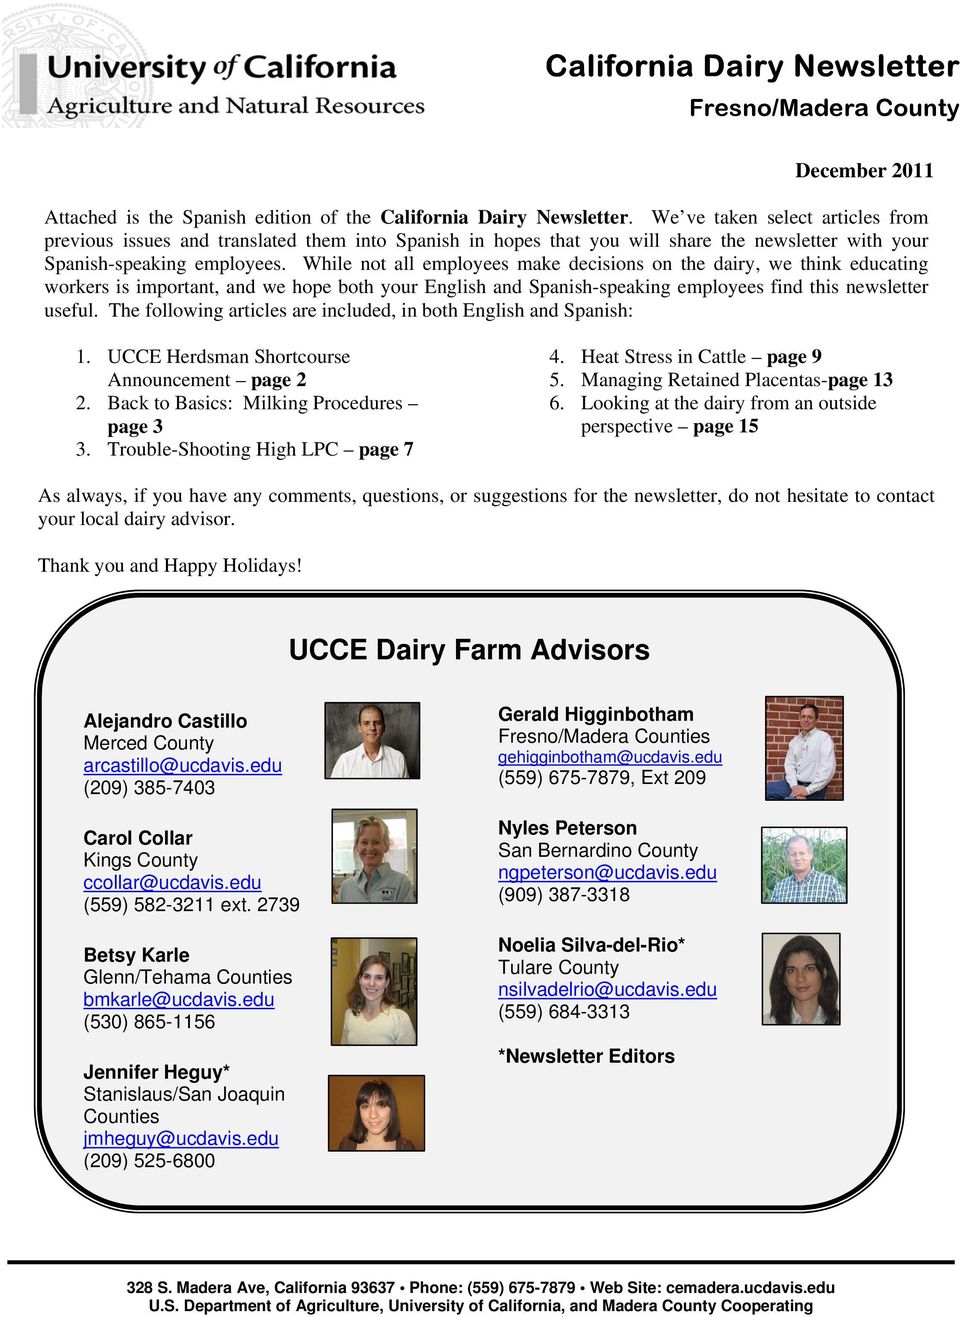 While not all employees make decisions on the dairy, we think educating workers is important, and we hope both your English and Spanish-speaking employees find this newsletter useful.